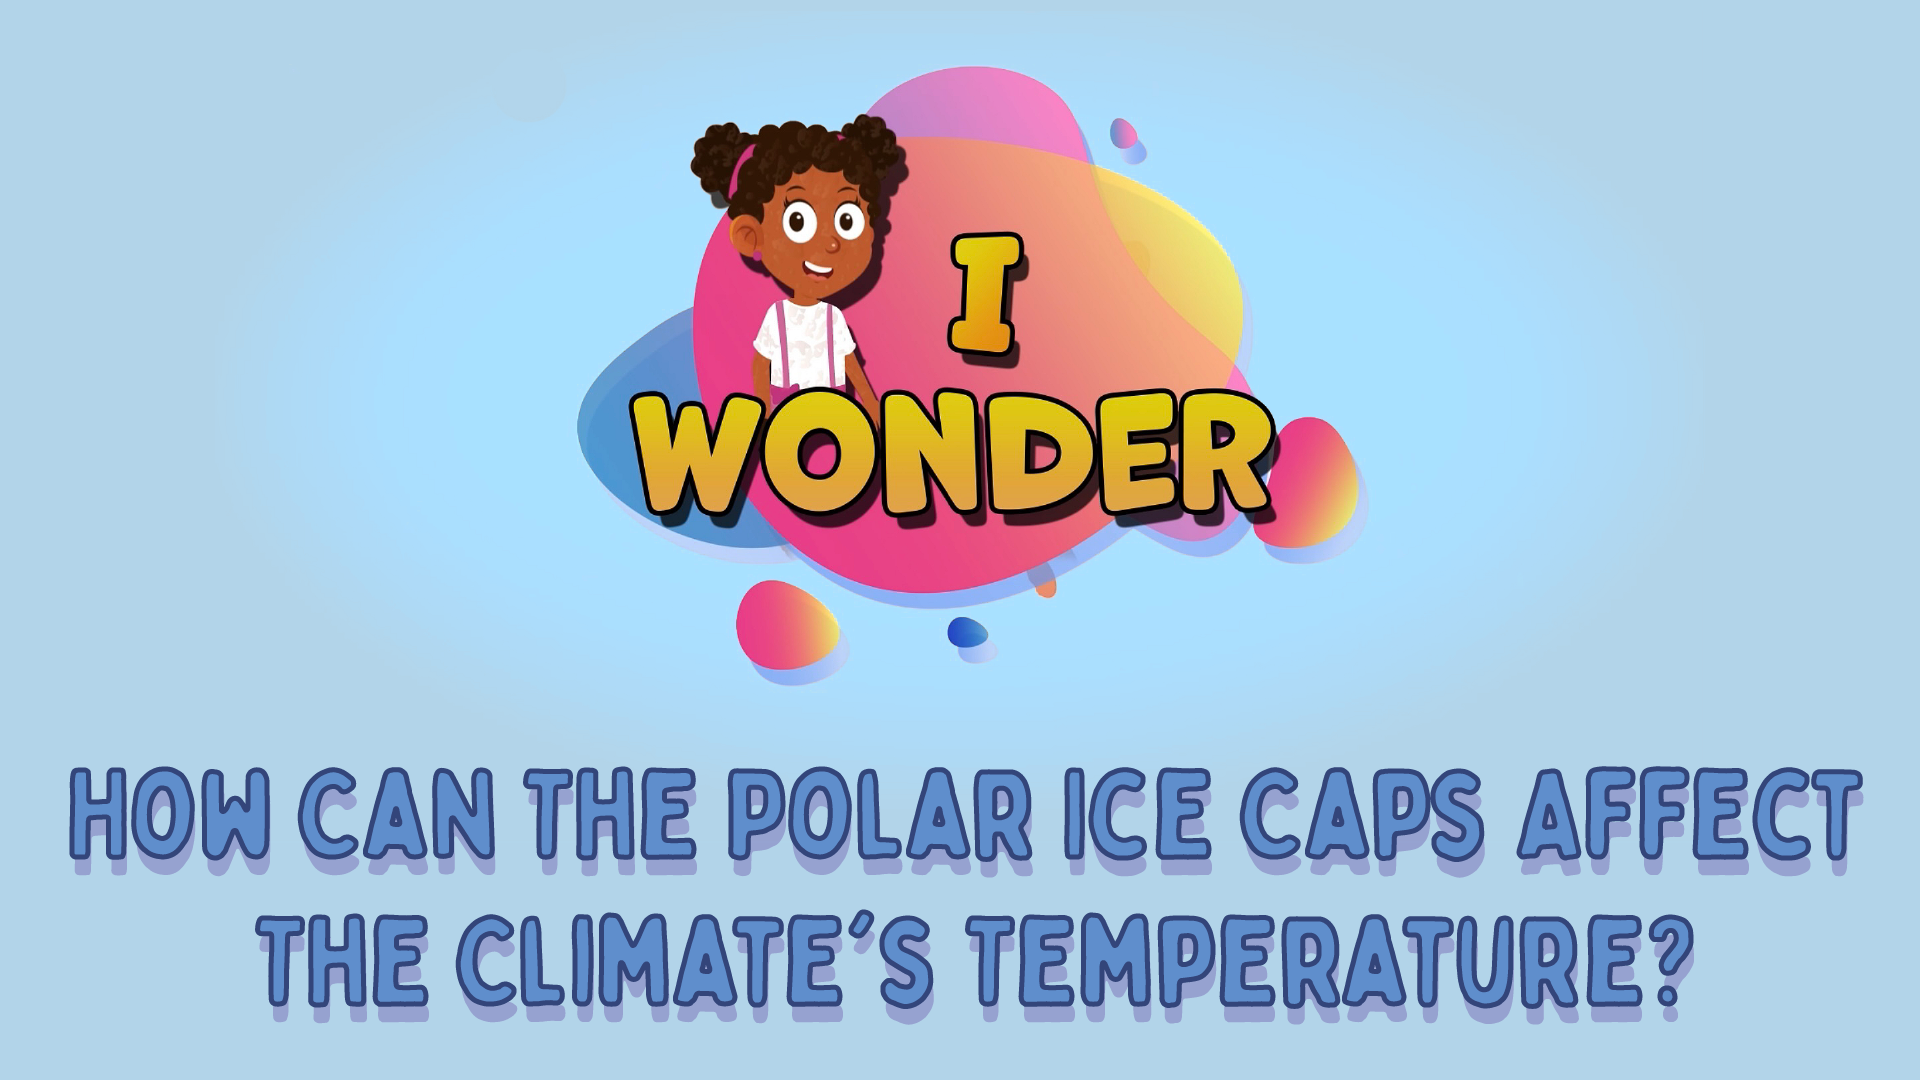 How Can The Polar Ice Caps Affect The Climate’s Temperature?